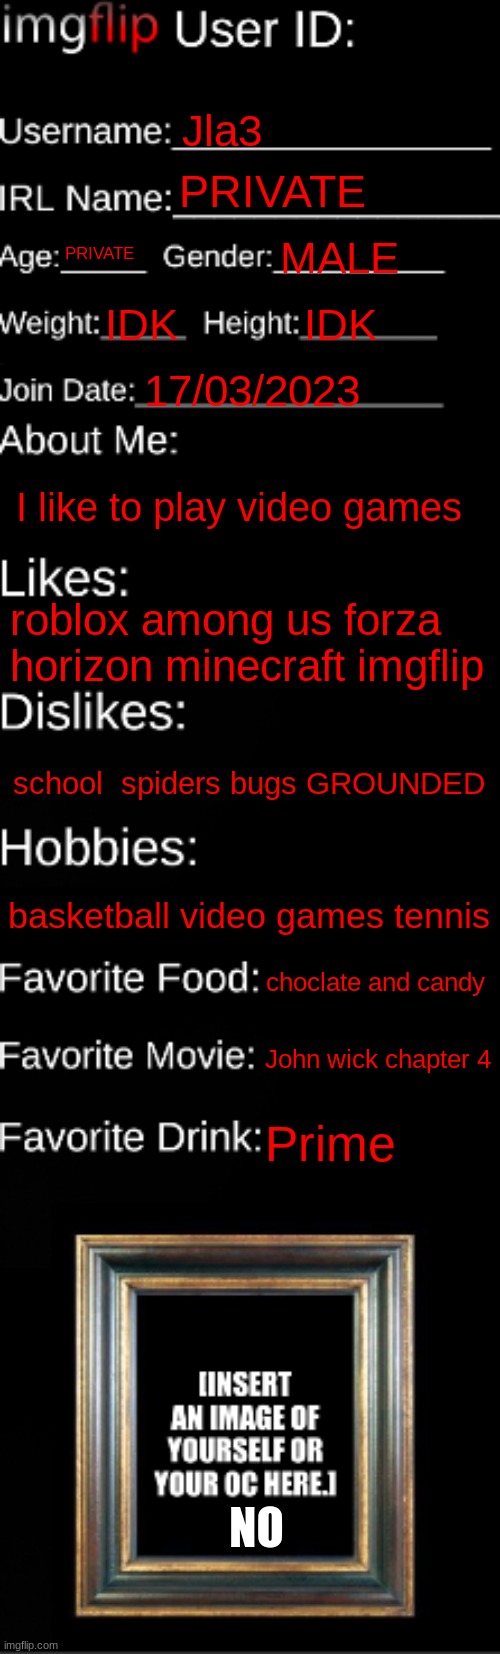 imgflip ID Card | Jla3; PRIVATE; PRIVATE; MALE; IDK; IDK; 17/03/2023; I like to play video games; roblox among us forza horizon minecraft imgflip; school  spiders bugs GROUNDED; basketball video games tennis; choclate and candy; John wick chapter 4; Prime; NO | image tagged in imgflip id card | made w/ Imgflip meme maker